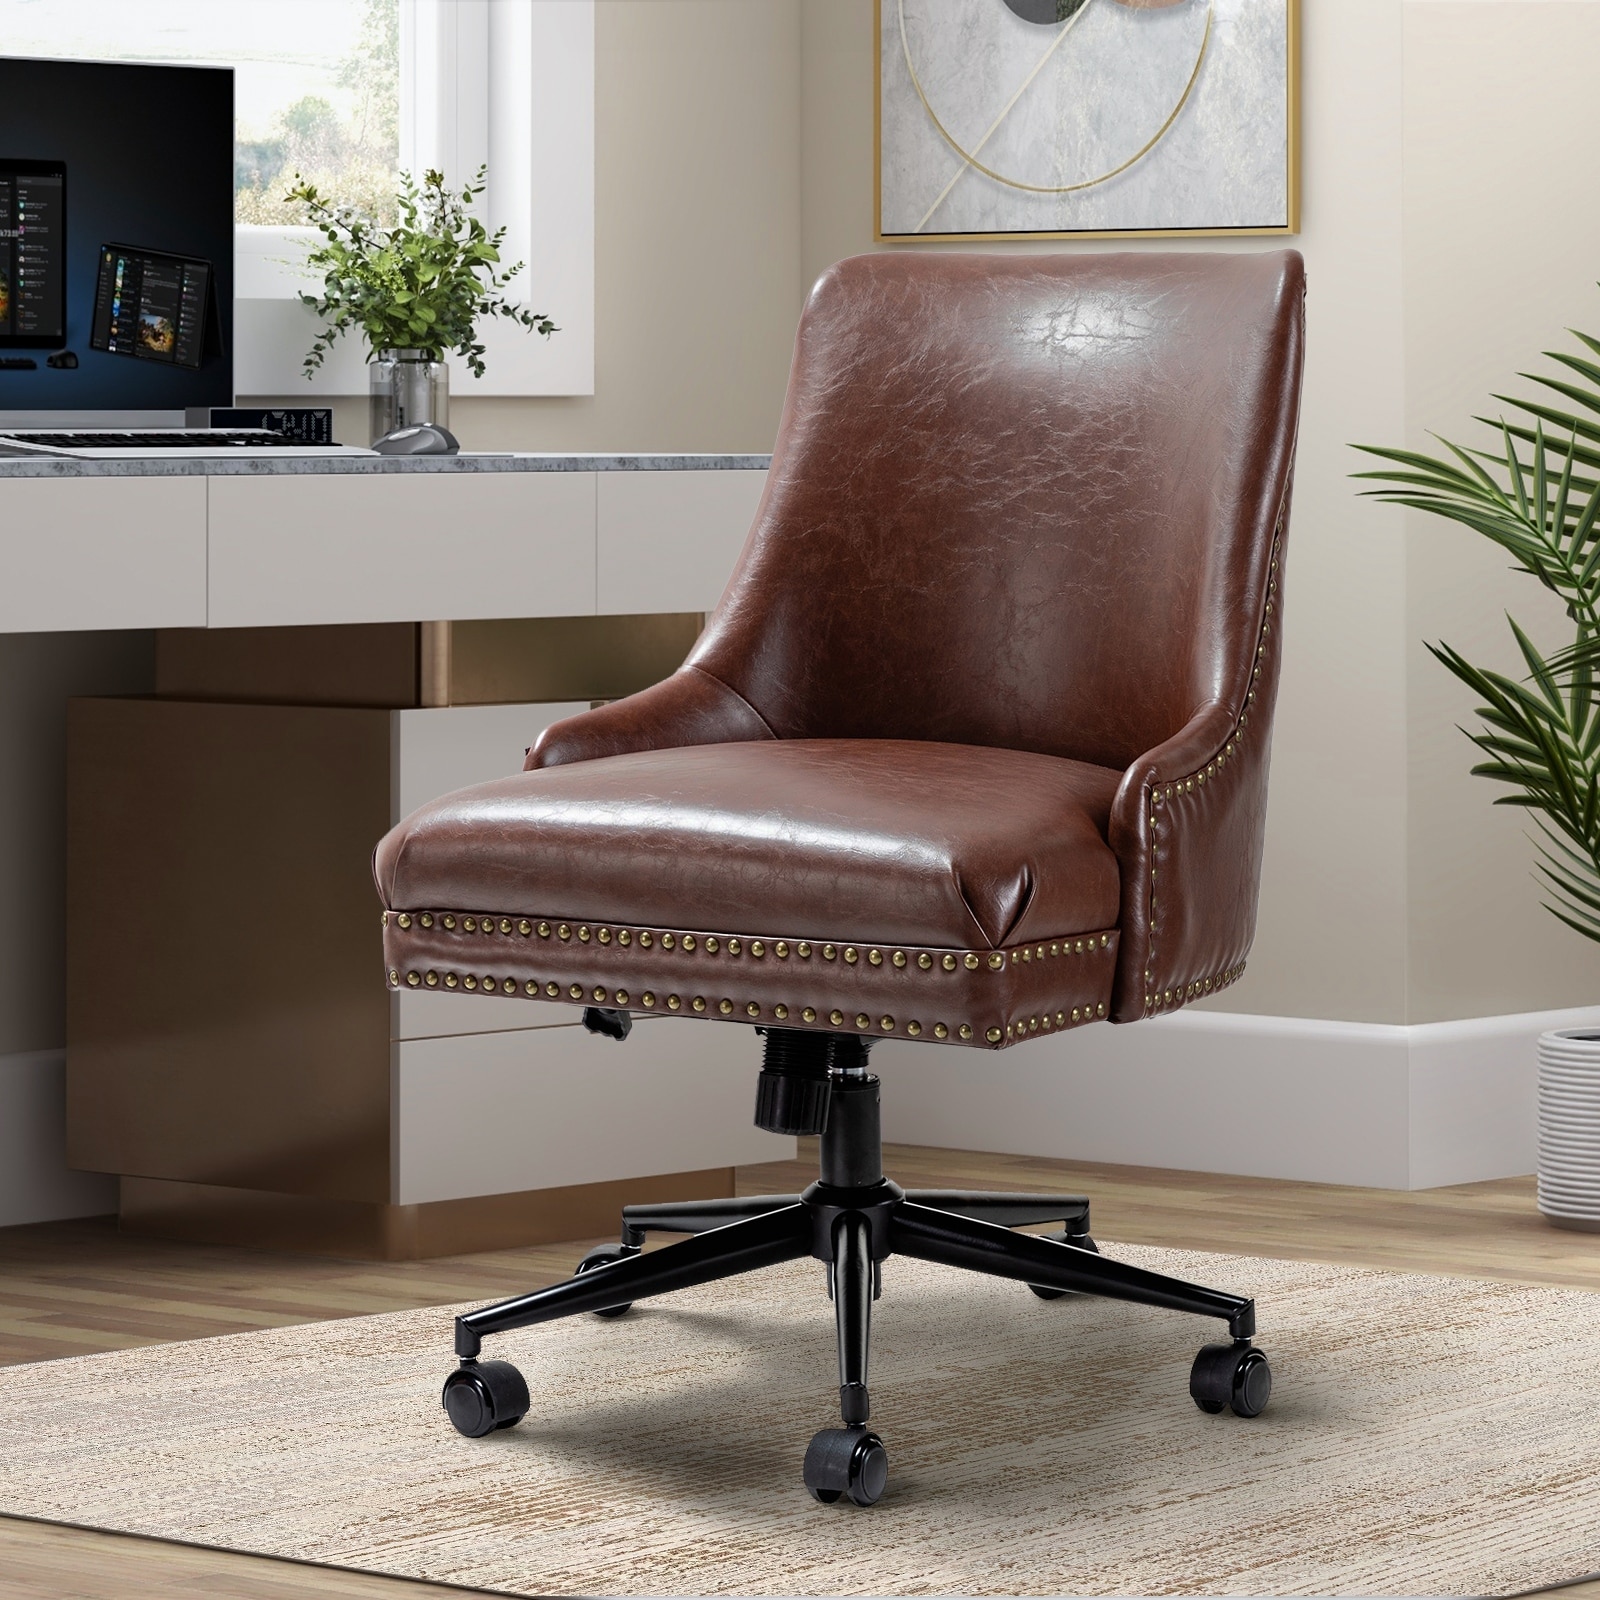 HULALA HOME Faux Leather Home Office Desk Chair, Adjustable Swivel Computer  Chair with Golden Legs and Arms, Comfy Upholstered Task Chair,Camel